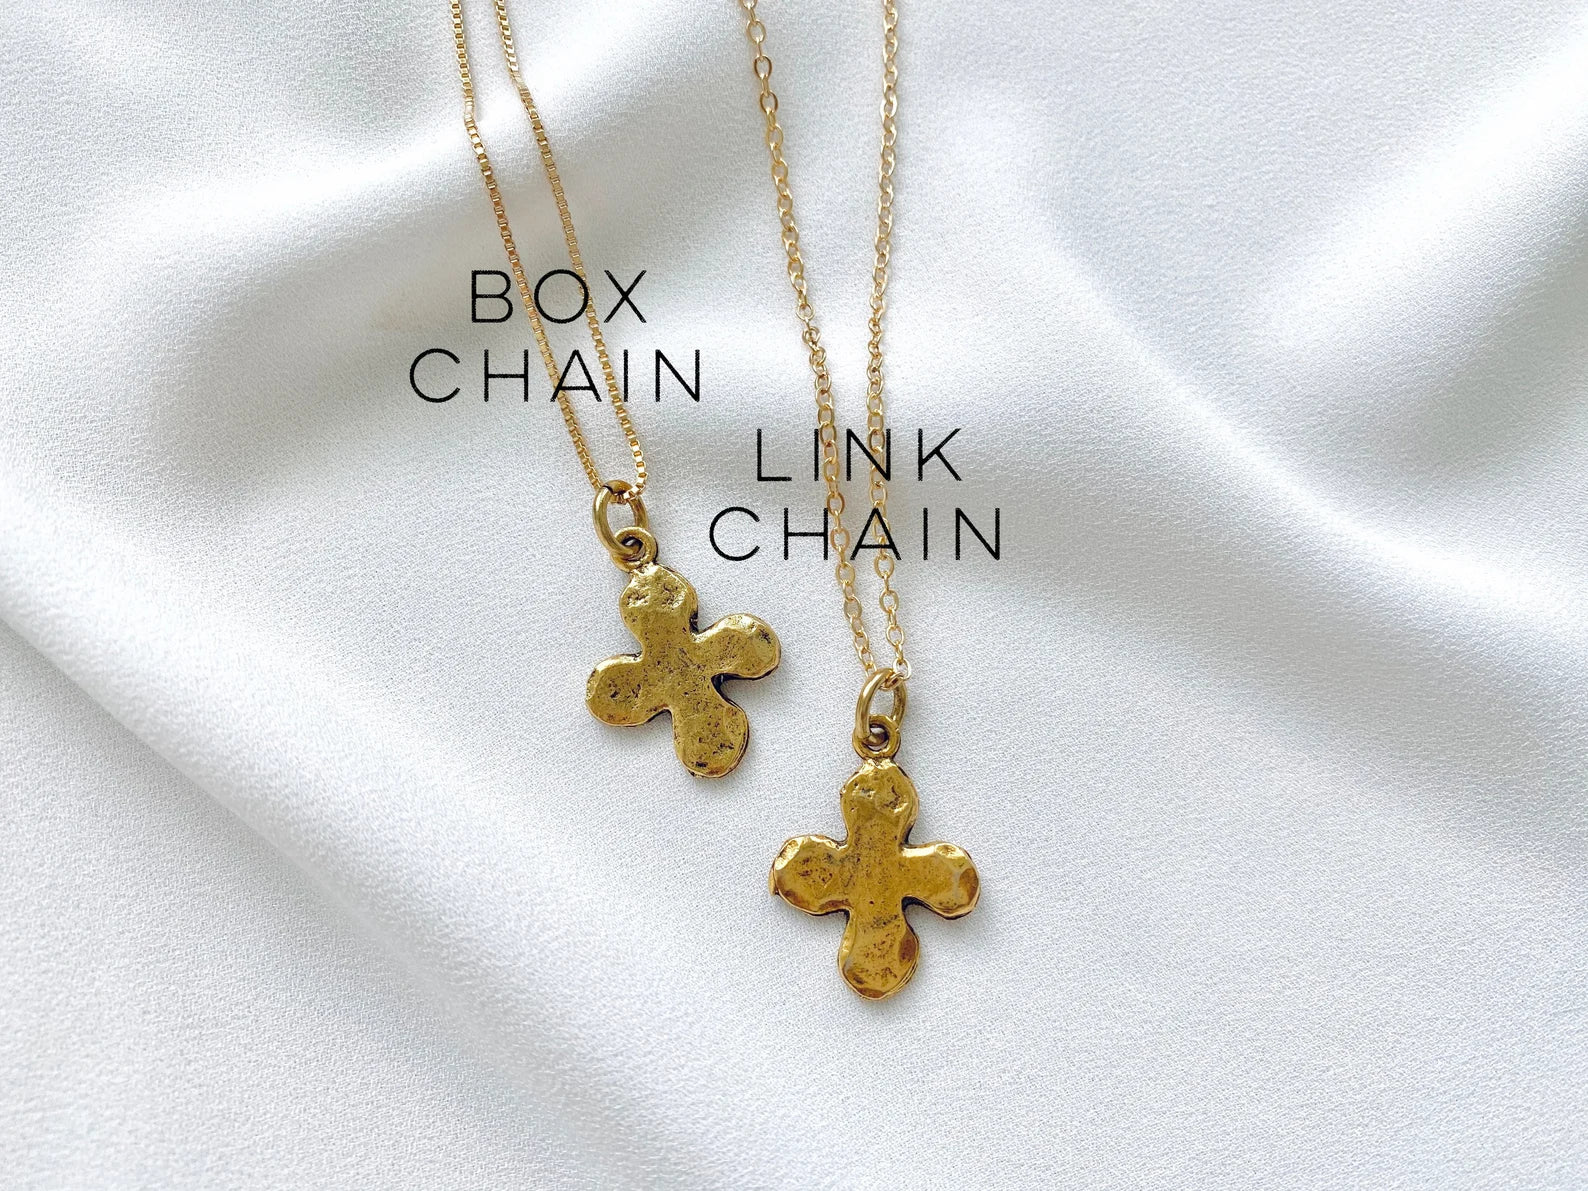 Ancient Rustic Hammered Cross Pendant Necklace - Gold Filled Chain